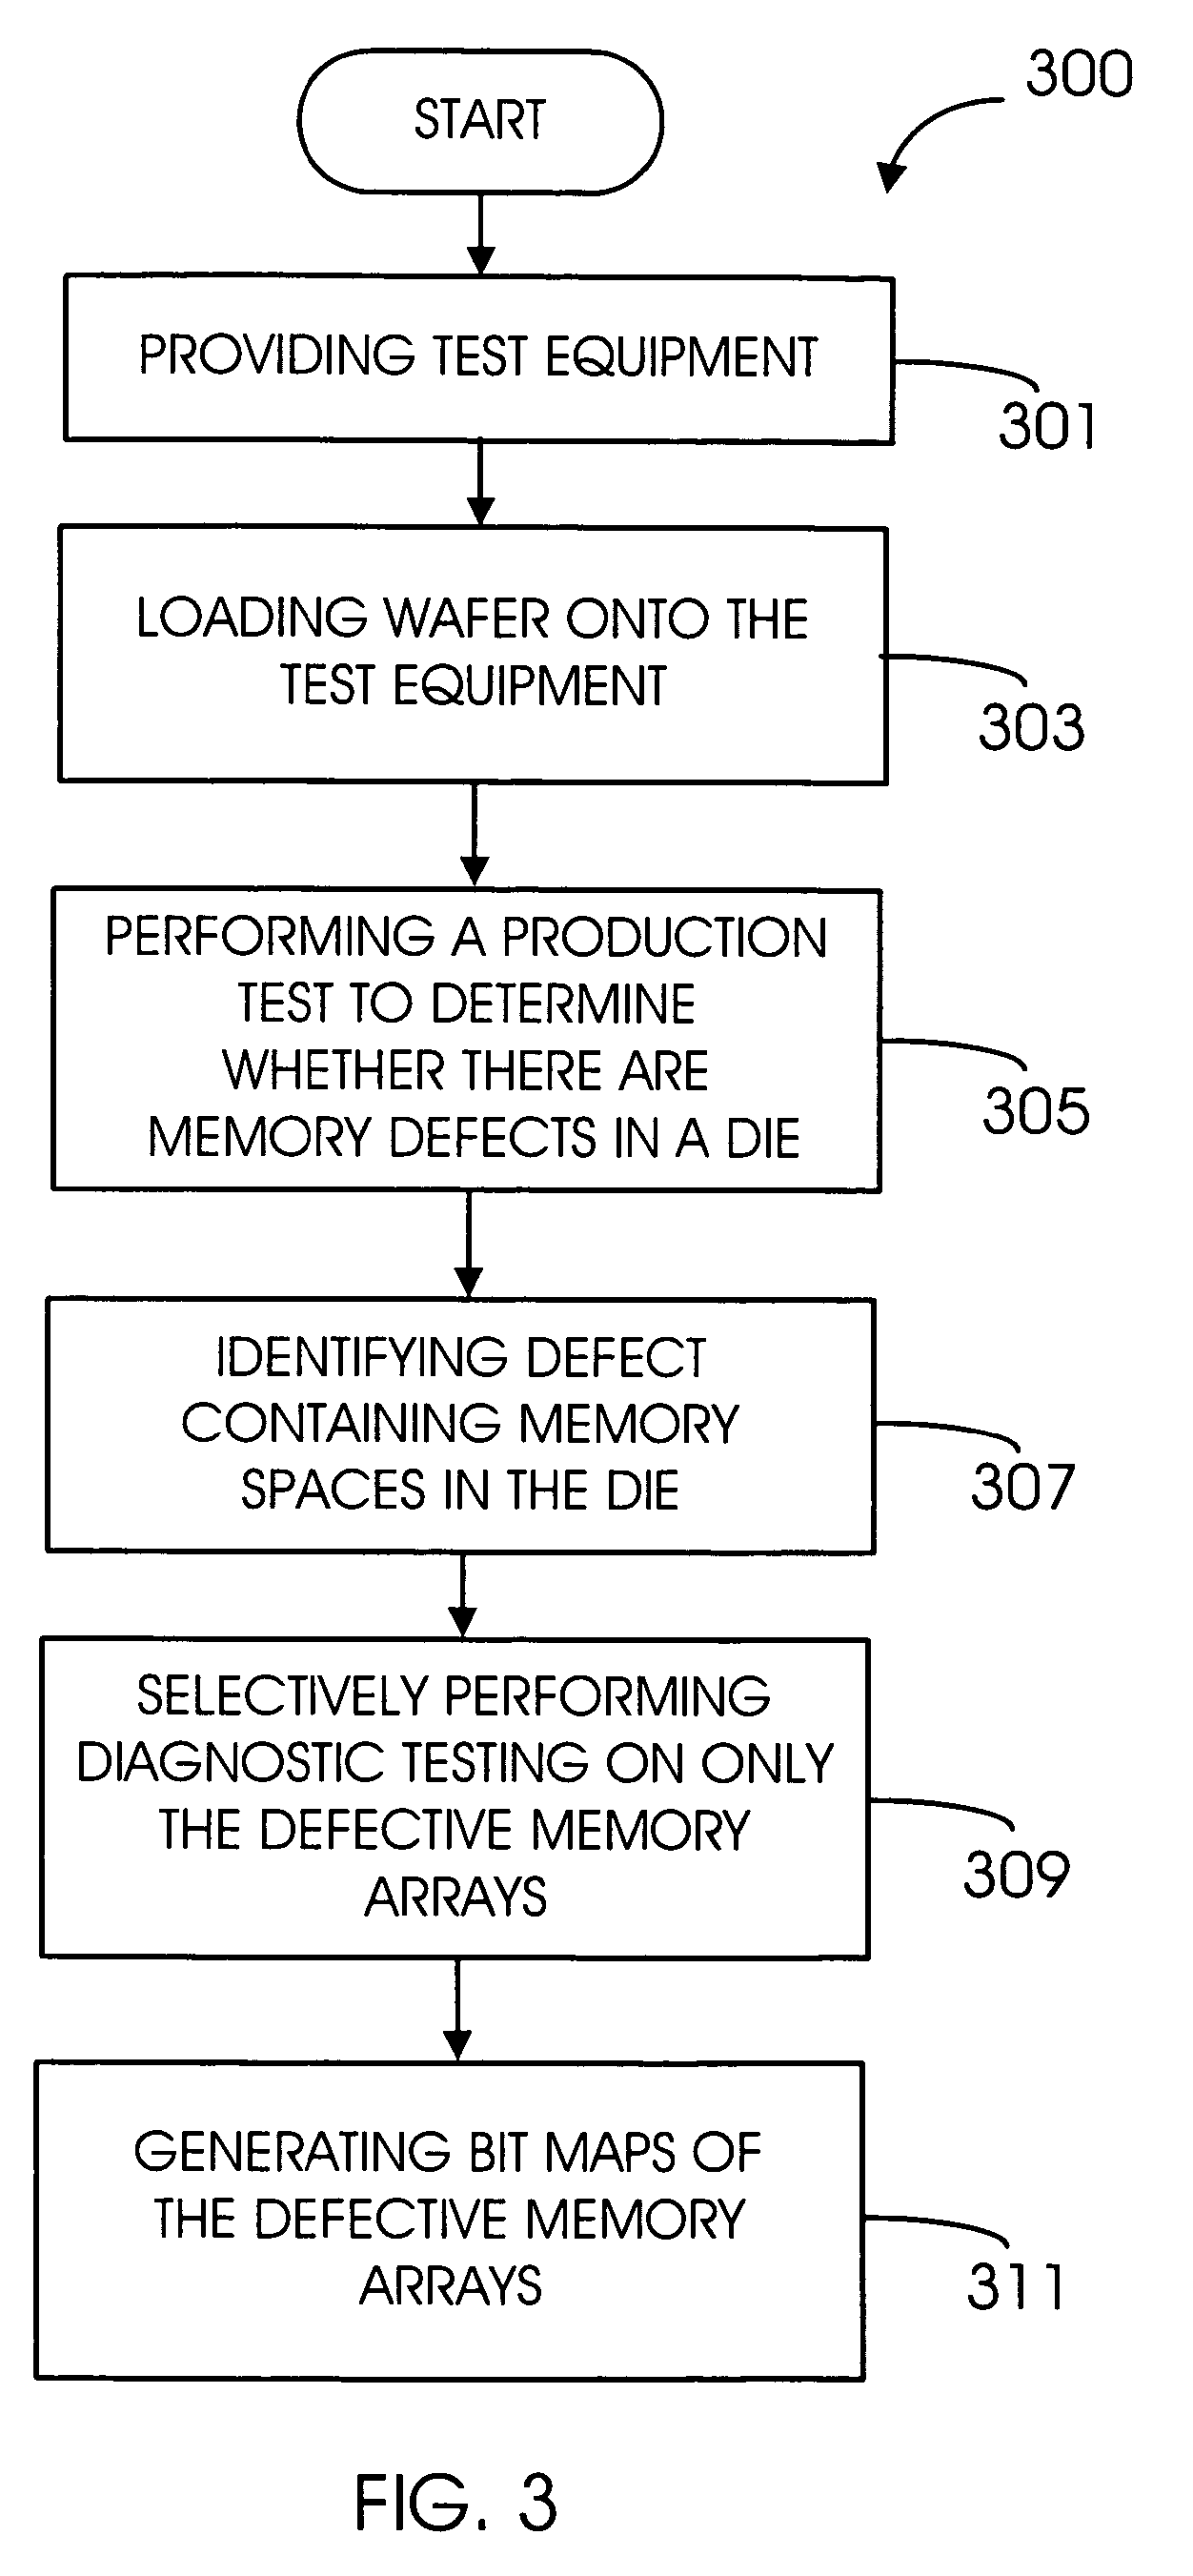 Process for conducting high-speed bitmapping of memory cells during production